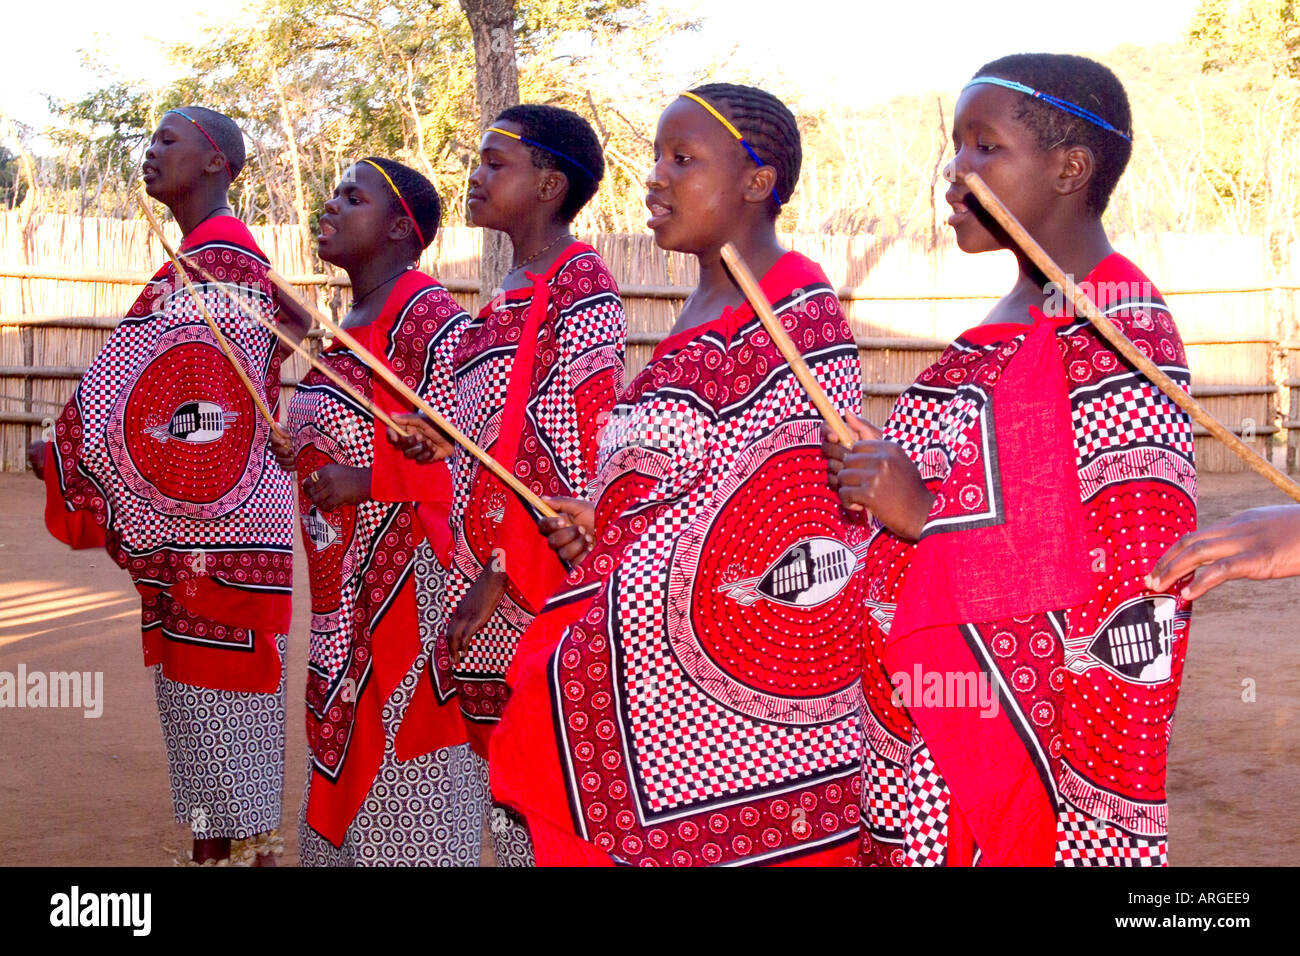 Colorful Women in Tradtional Dress at a Cultural Village in Swaziland Village Swaziland Stock Photo